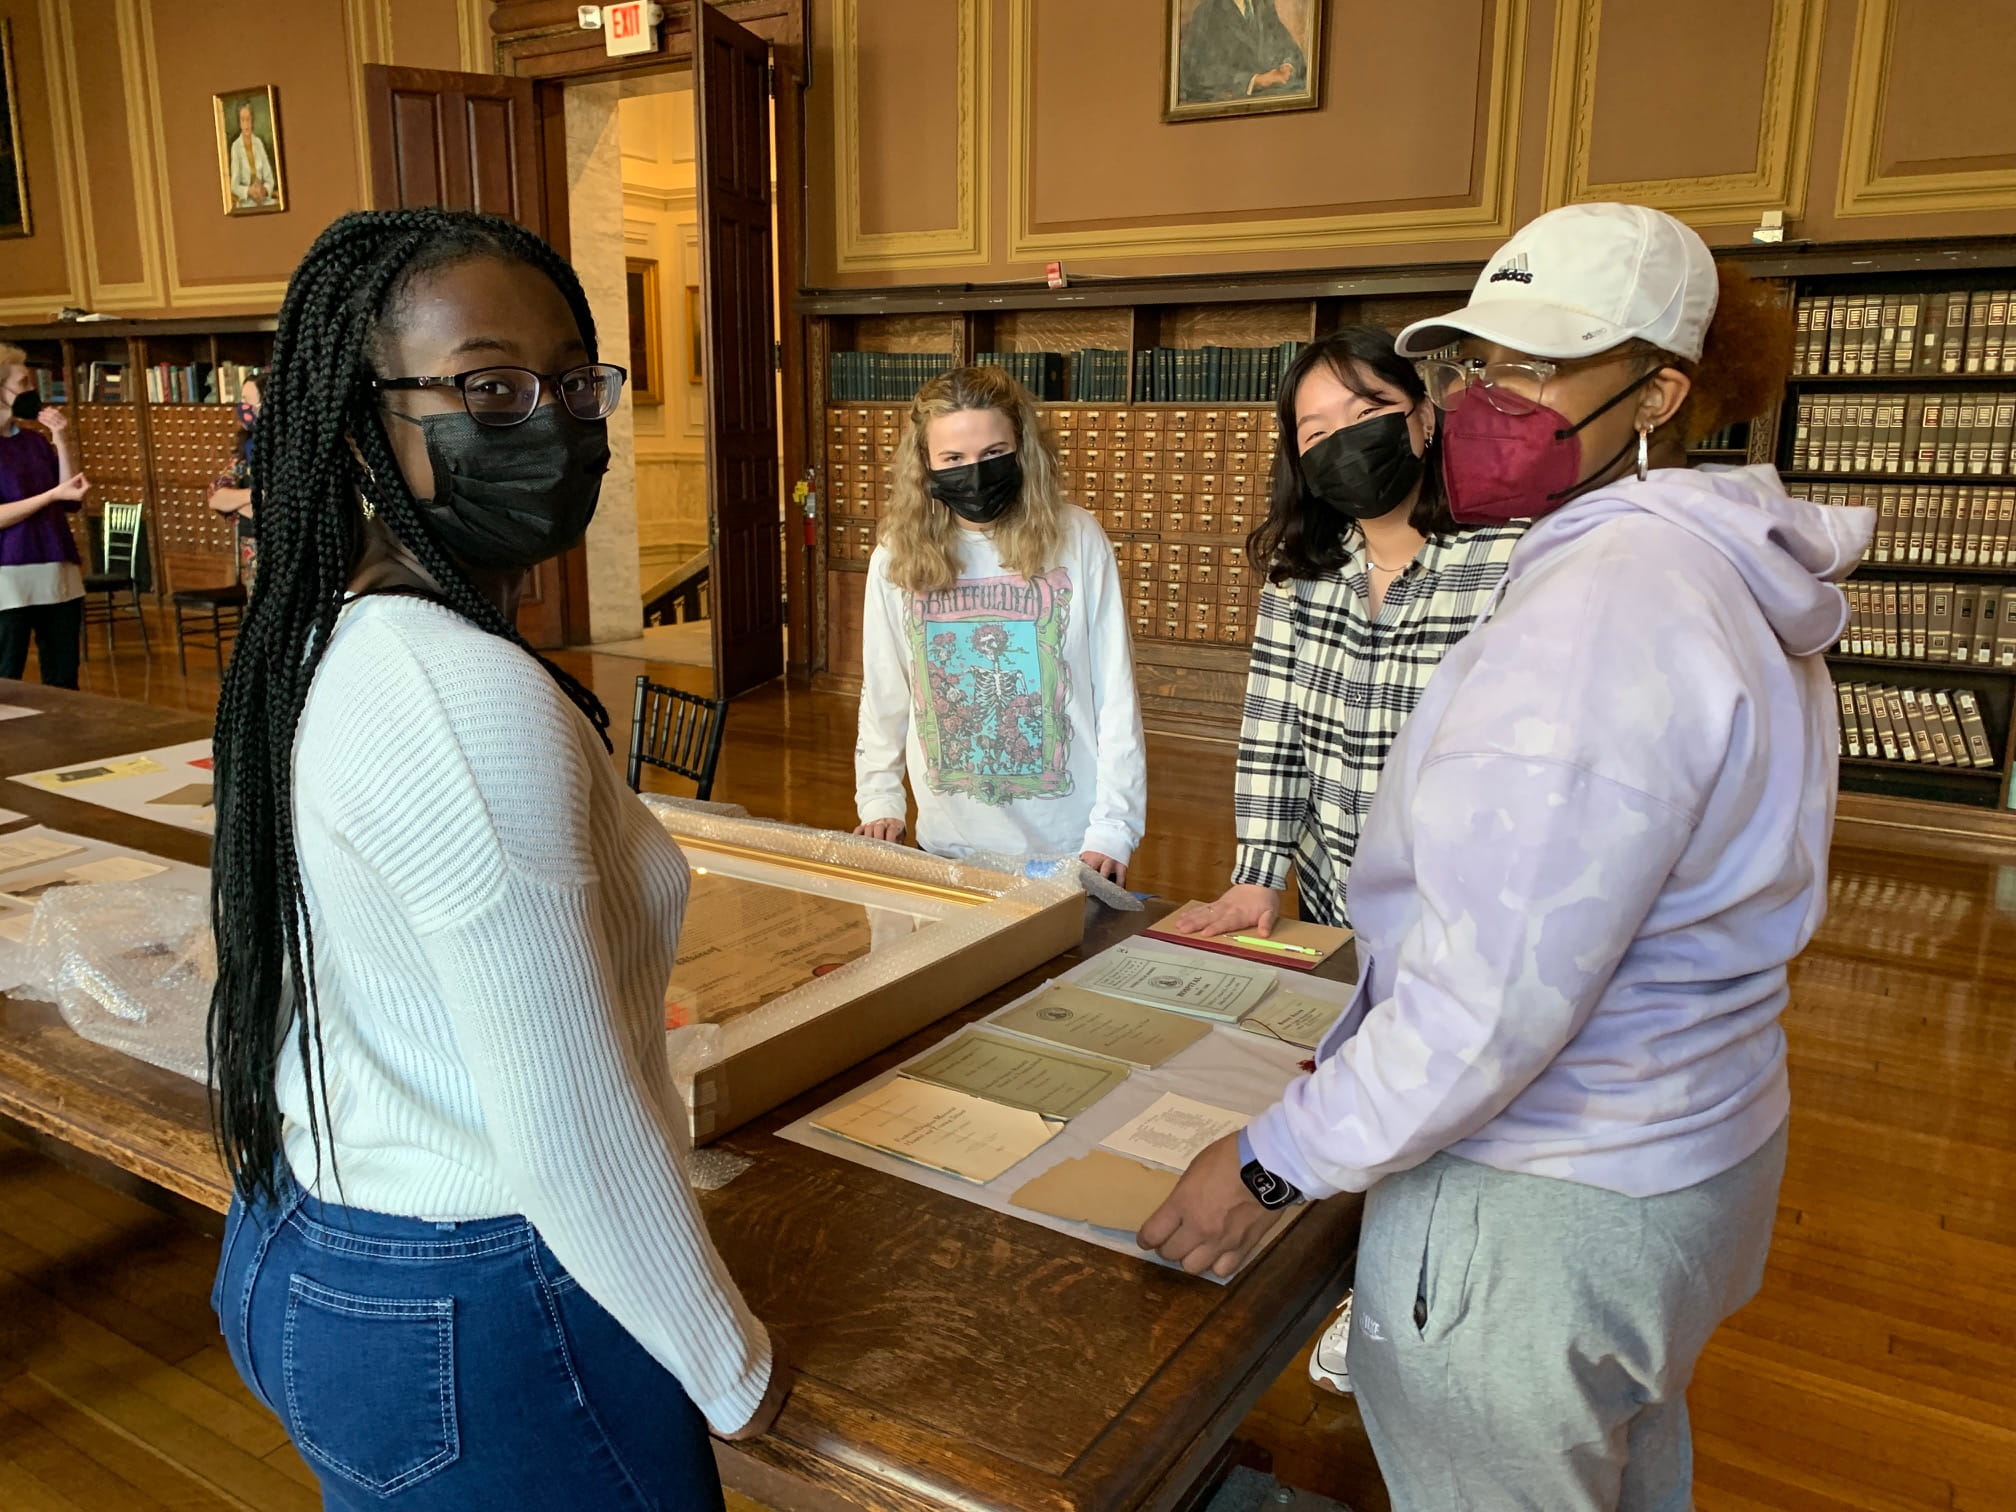 Masked students pose on a table with primary source documents during an on-site visit to the museum.  Photo courtesy of Jacqui Bowman.